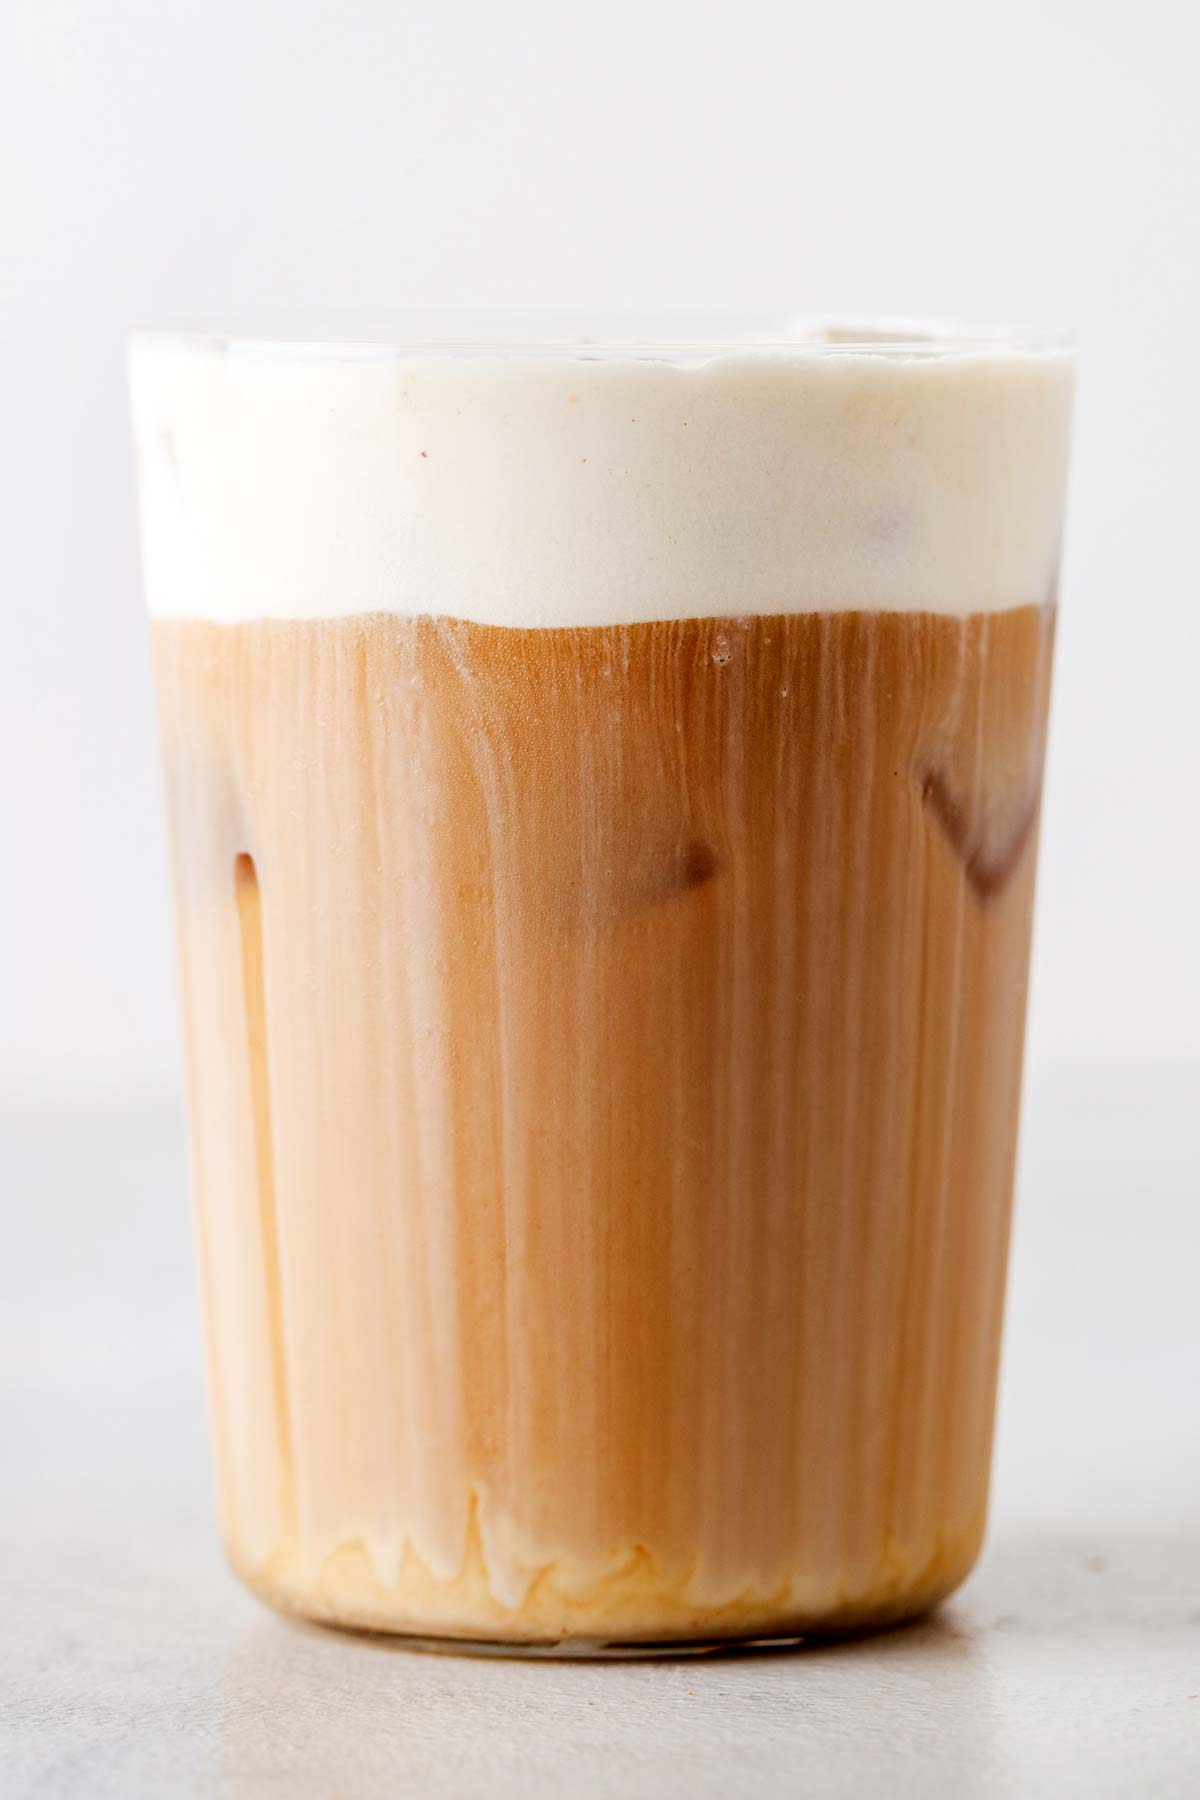 Salted caramel cold foam on top of an iced coffee.